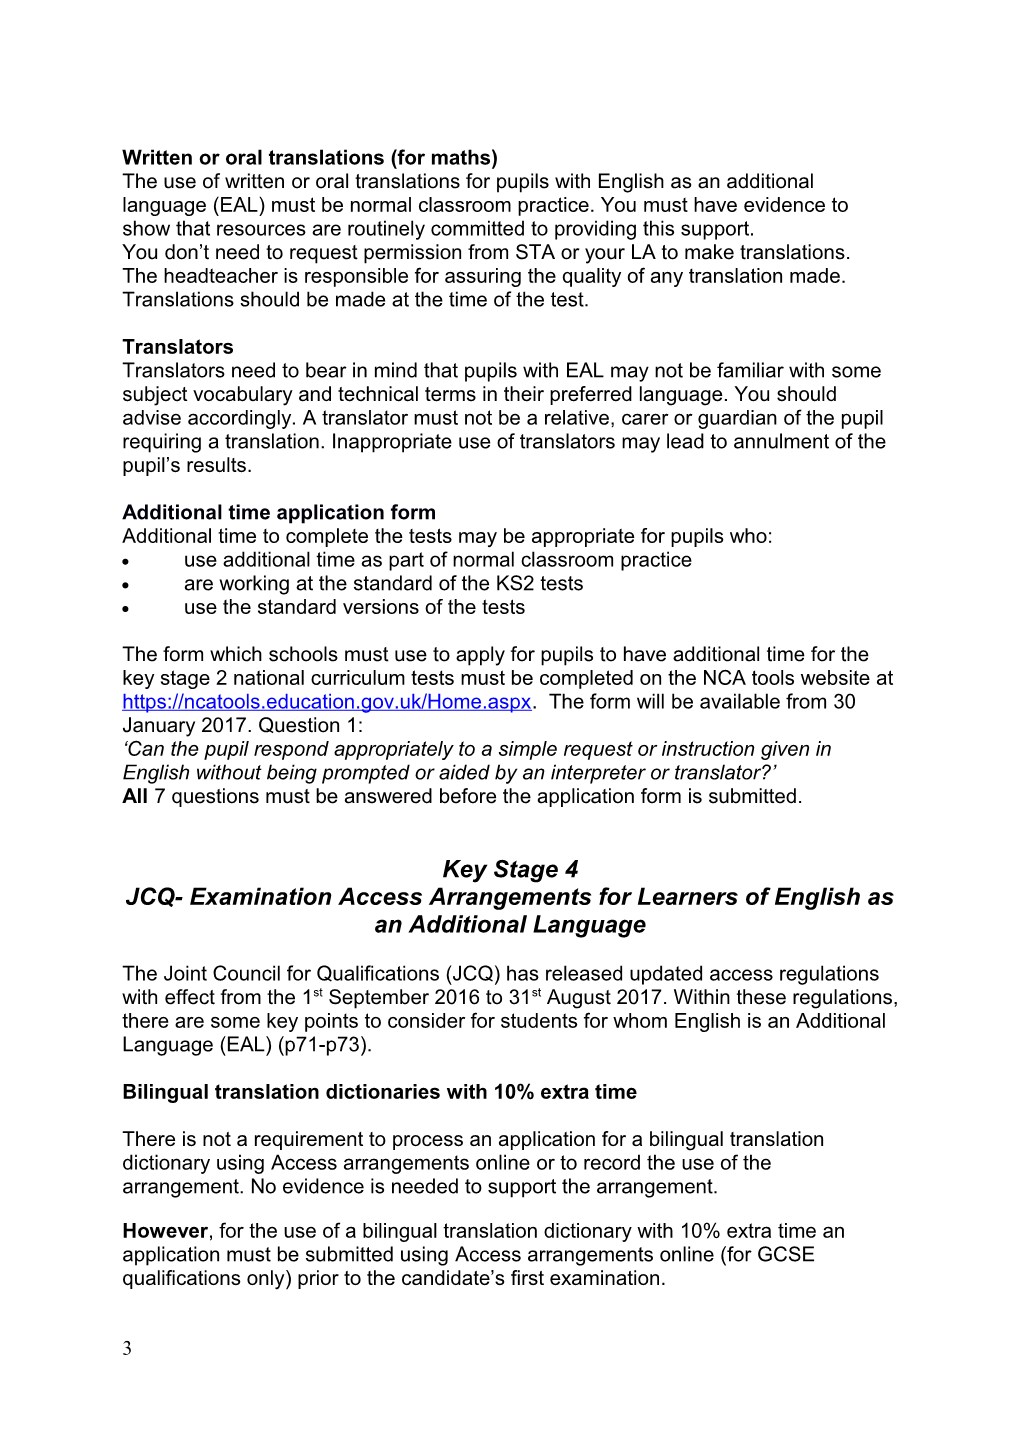 2017 Formal Assessment Arrangements for Pupils with English As an Additional Language (EAL)